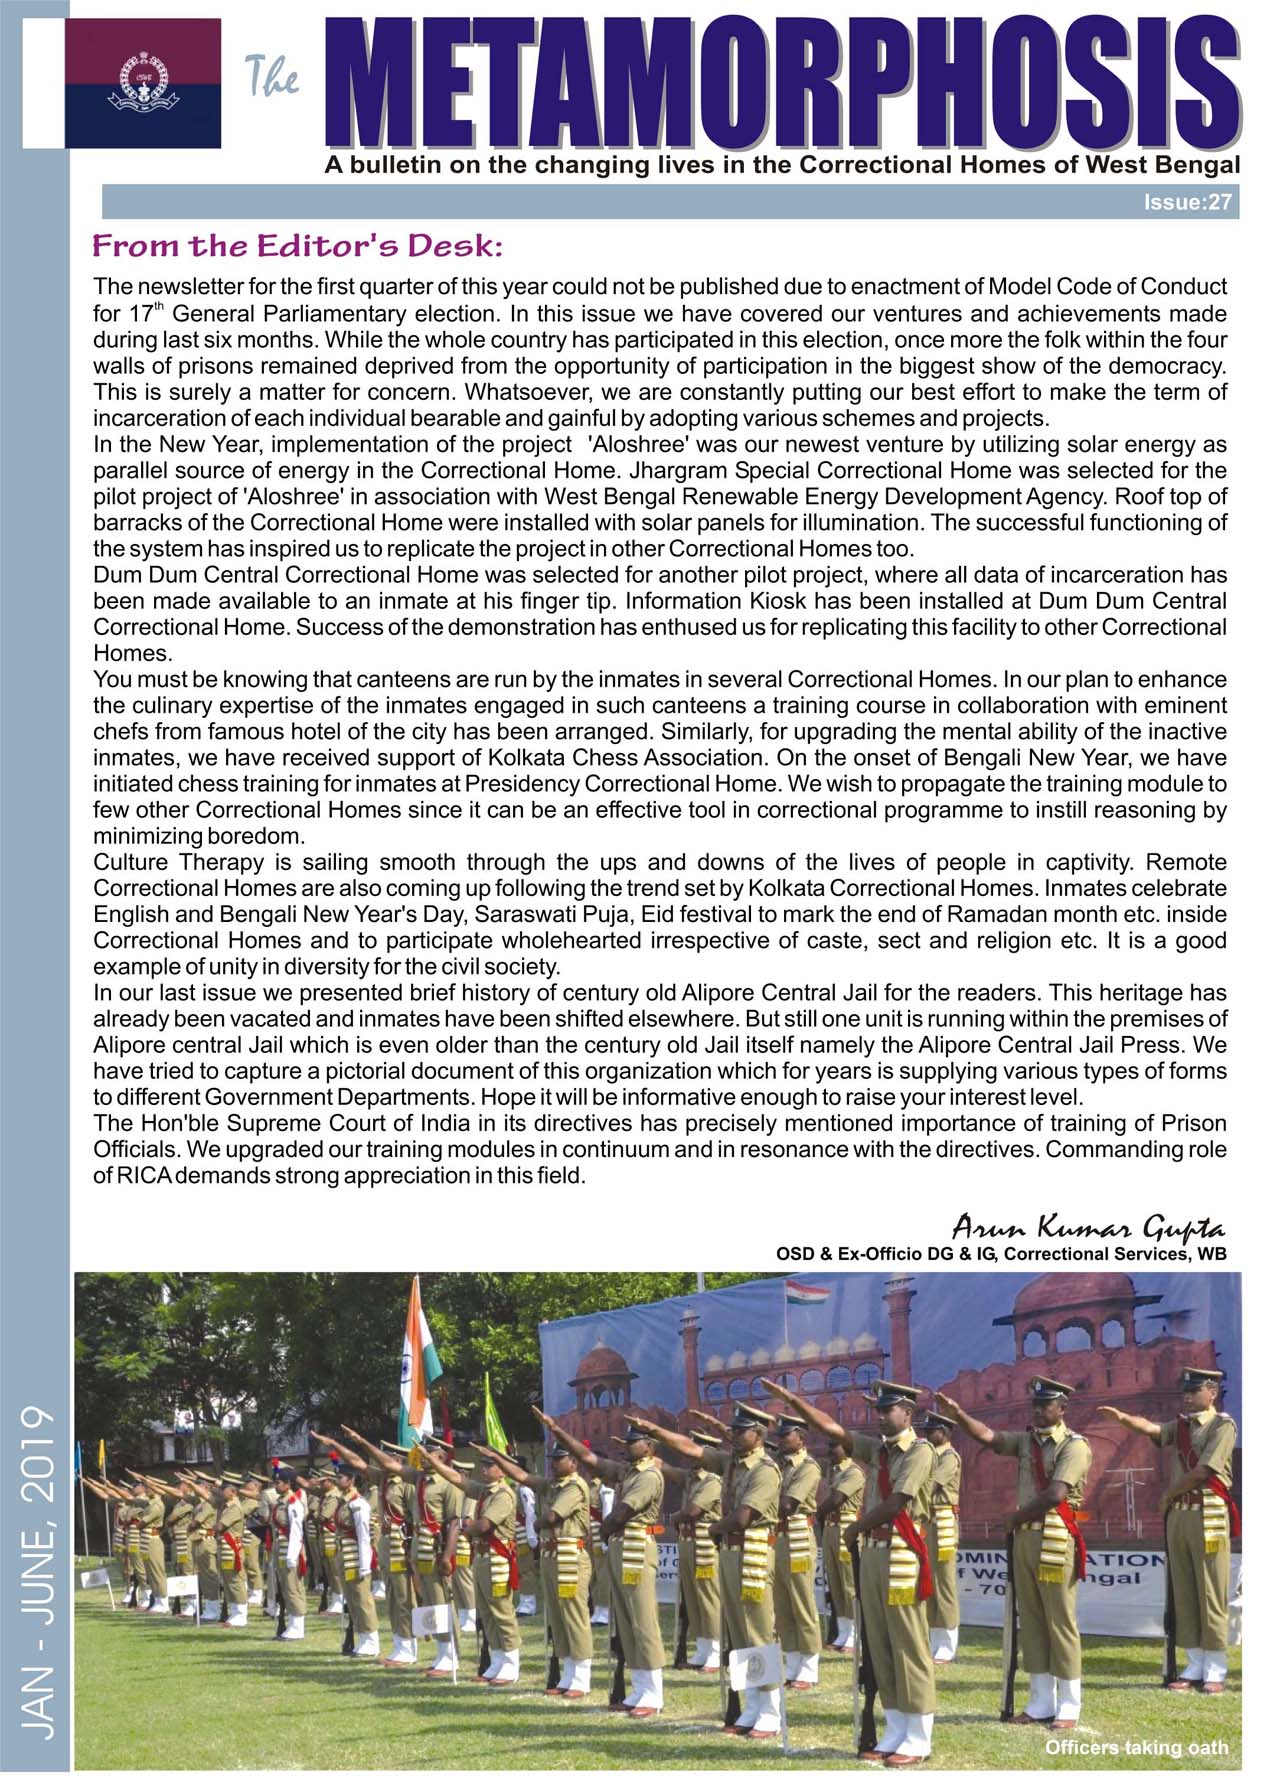 Official Website of West Bengal Correctional Services, India - Metamorphosis, A bulletin on the changing lives in the correctional homes of West Bengal